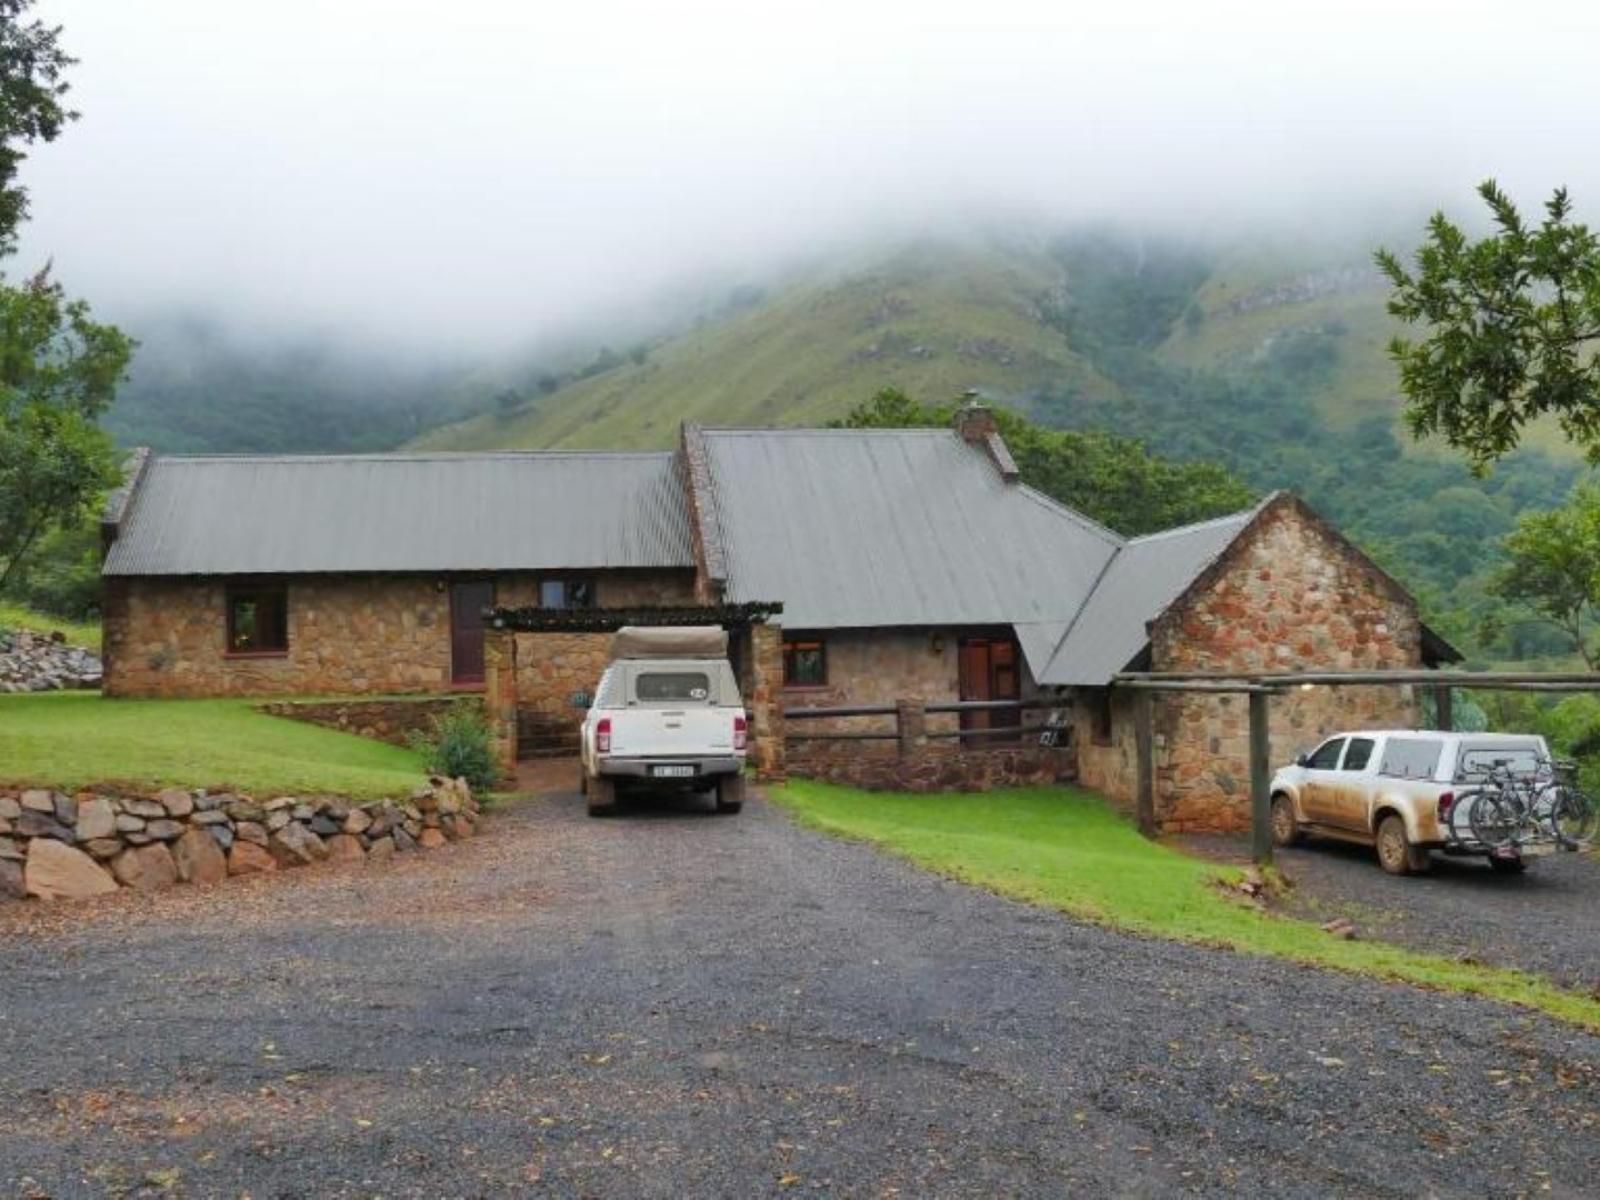 Verlorenkloof Wilgekraal Lydenburg Mpumalanga South Africa Barn, Building, Architecture, Agriculture, Wood, Mountain, Nature, Highland